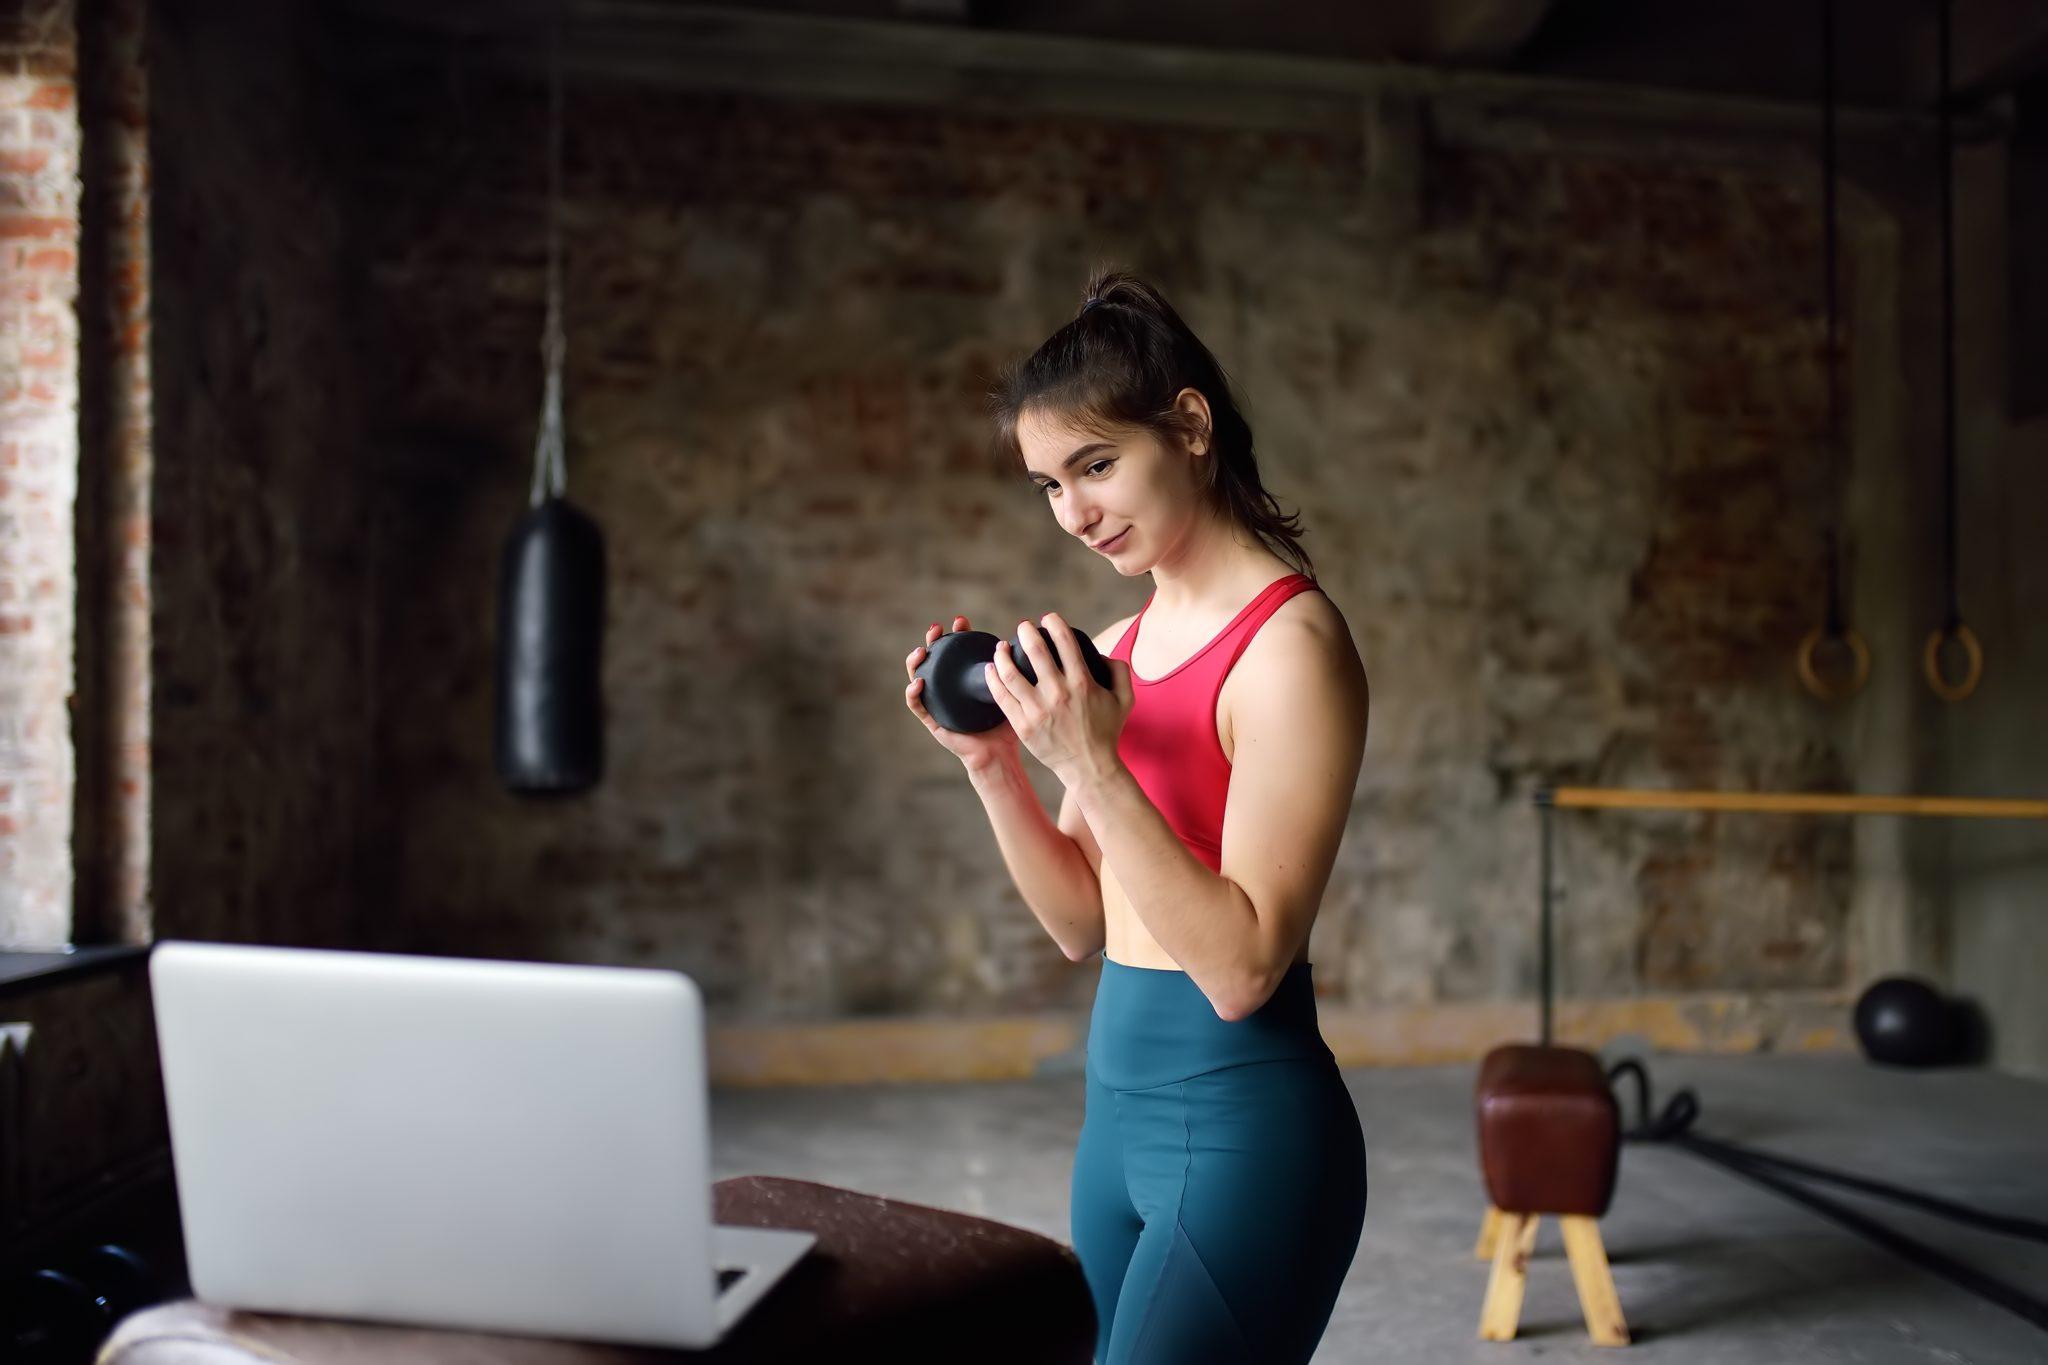 5 Reasons to Hire an Online Personal Trainer Near Me